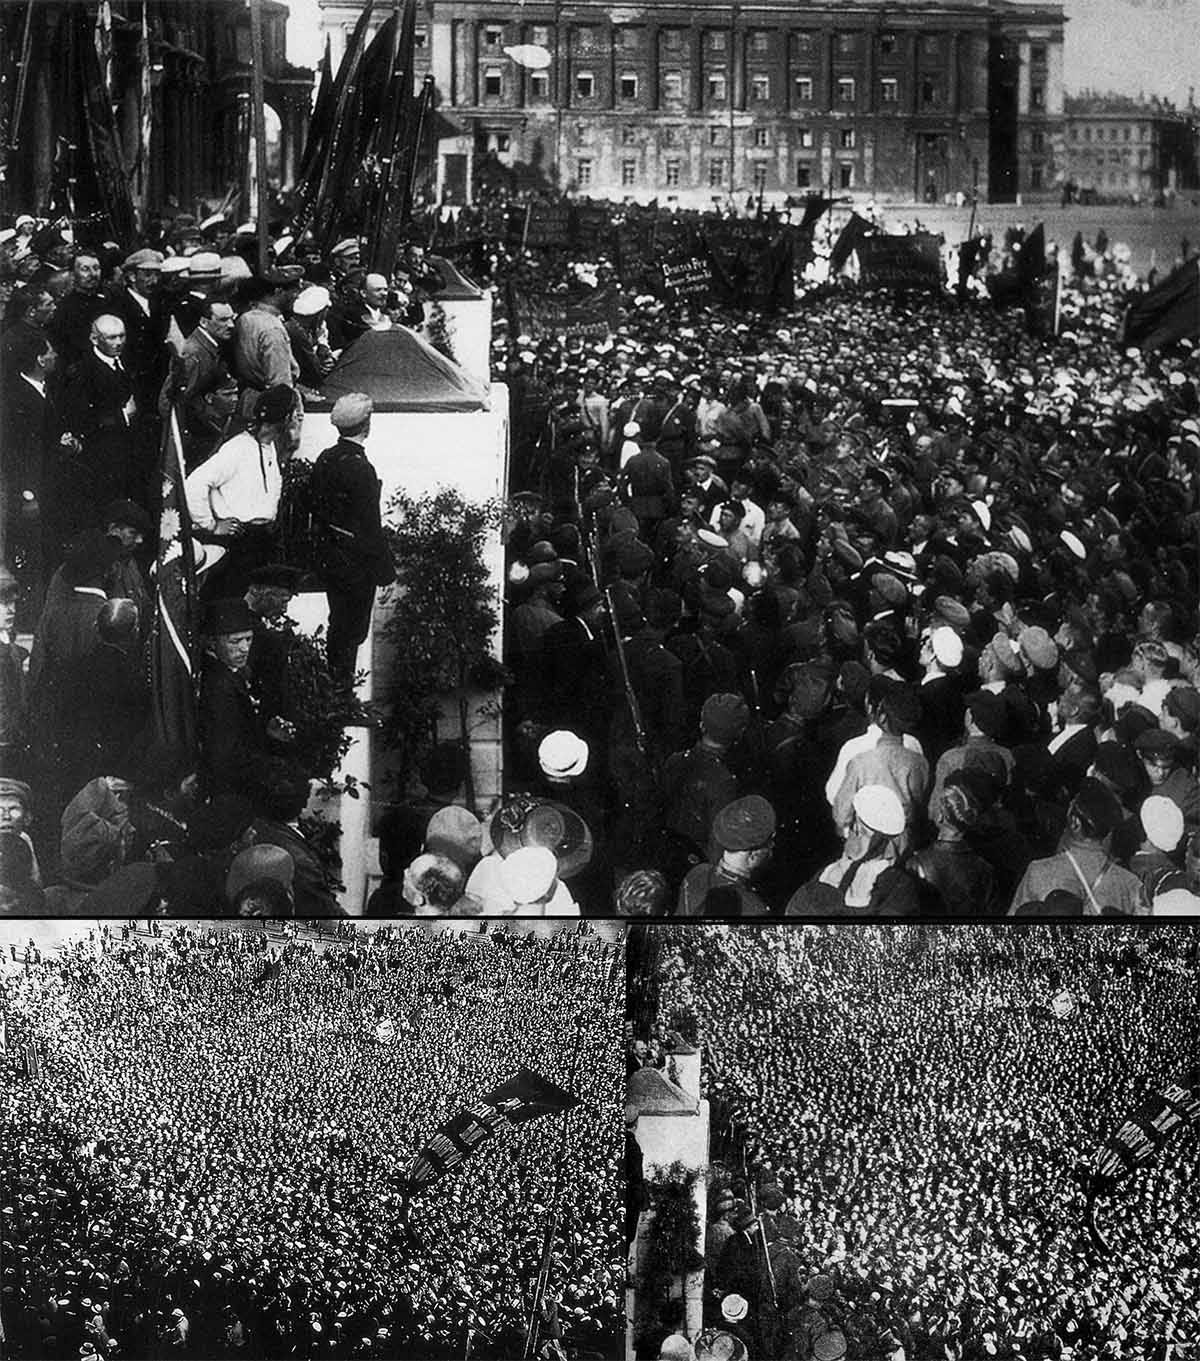 Here’s another case of embellishing a picture with extra details. Lenin was speaking to a crowd in 1920 but four years later, before publishing the image, the editors decided to make his audience bigger – so they used a larger crowd from another photo.